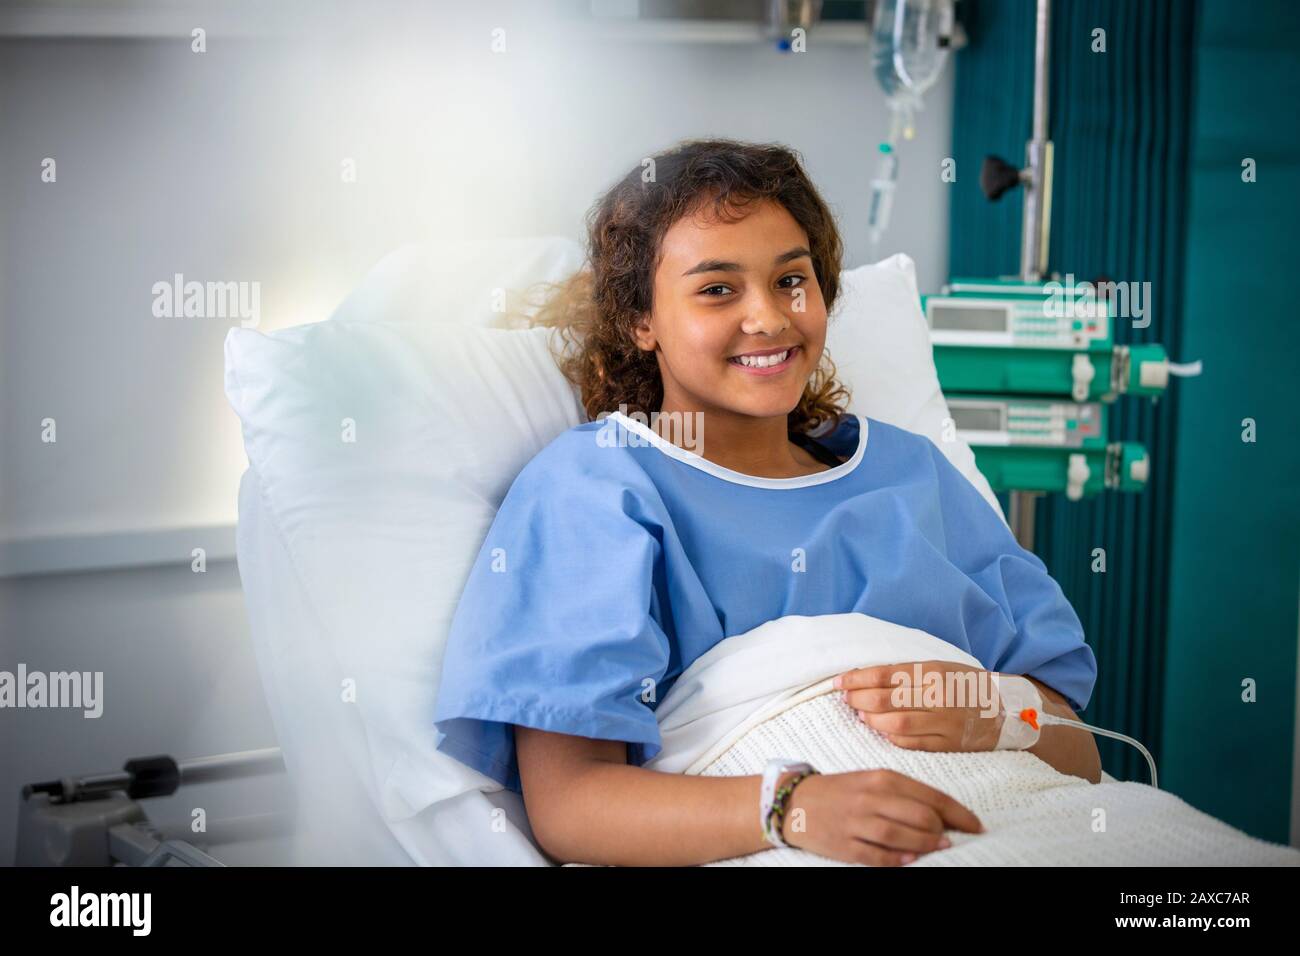 Portrait smiling girl patient in hospital bed Stock Photo